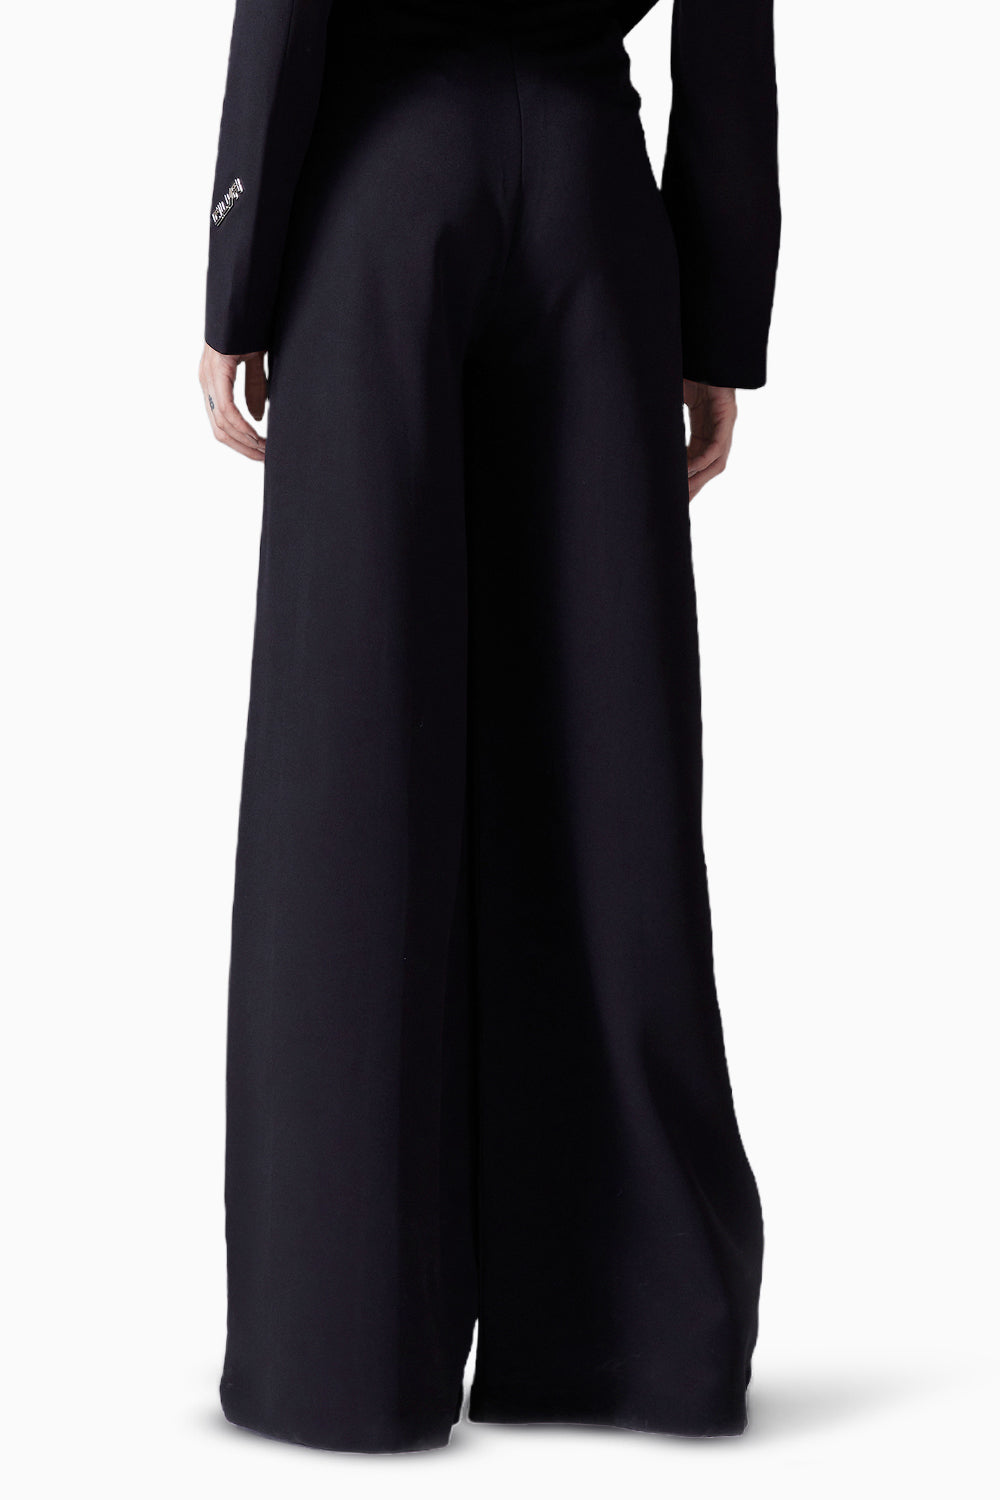 Black High Waisted Tailored Trousers